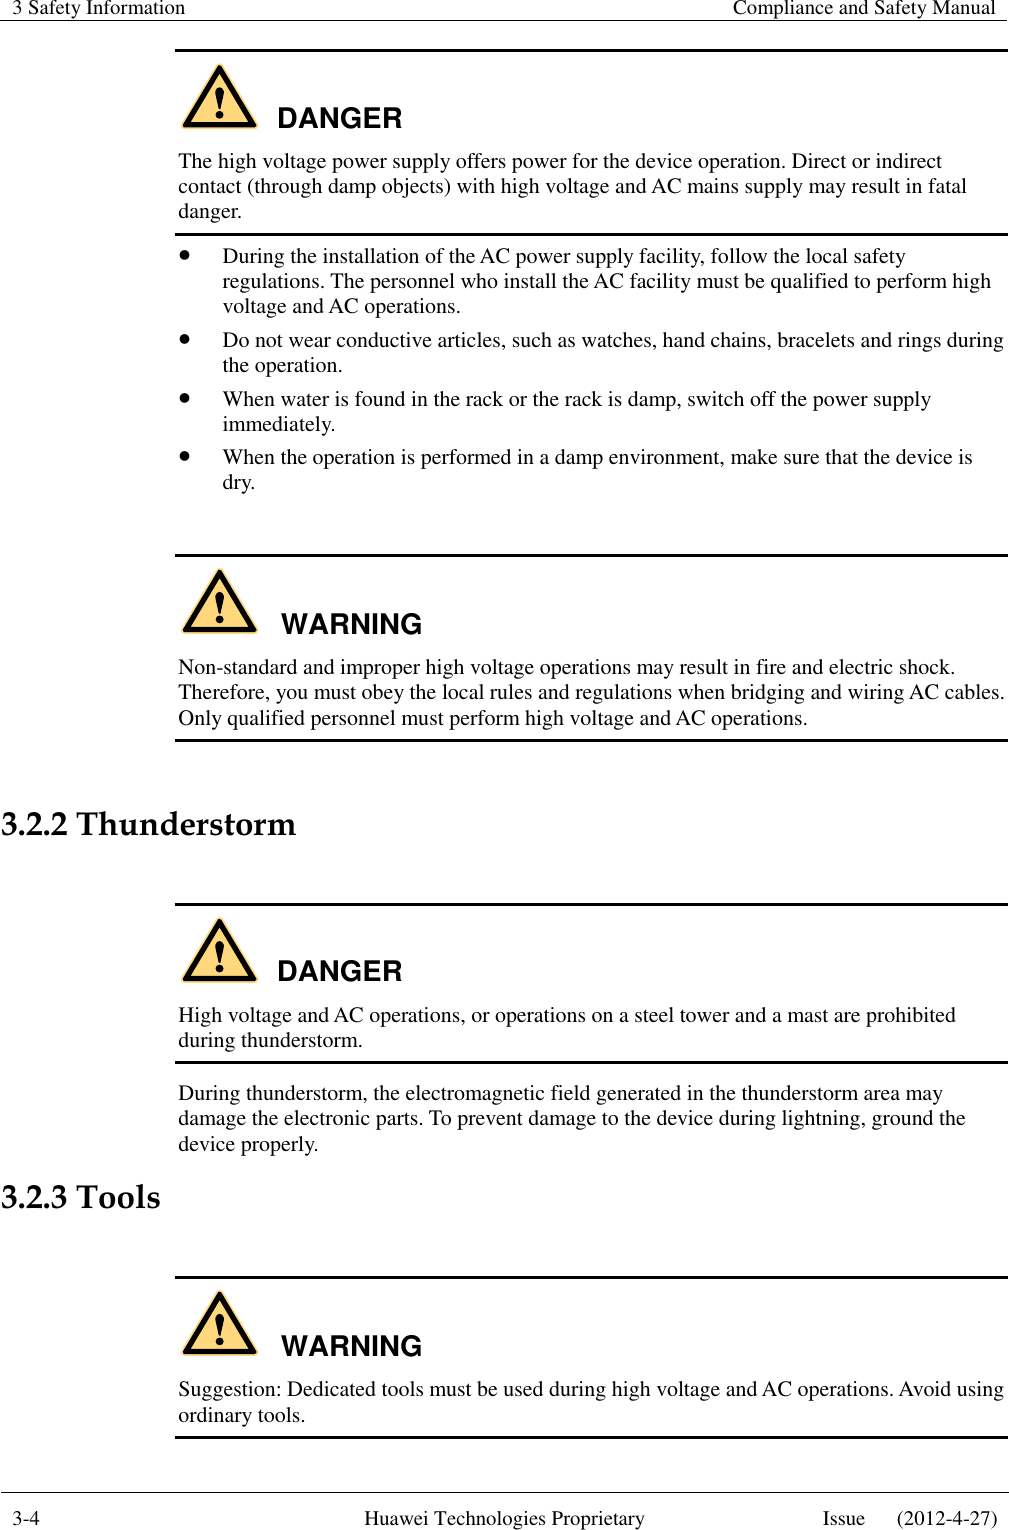 3 Safety Information    Compliance and Safety Manual  3-4 Huawei Technologies Proprietary Issue      (2012-4-27)  DANGER The high voltage power supply offers power for the device operation. Direct or indirect contact (through damp objects) with high voltage and AC mains supply may result in fatal danger.  During the installation of the AC power supply facility, follow the local safety regulations. The personnel who install the AC facility must be qualified to perform high voltage and AC operations.  Do not wear conductive articles, such as watches, hand chains, bracelets and rings during the operation.  When water is found in the rack or the rack is damp, switch off the power supply immediately.  When the operation is performed in a damp environment, make sure that the device is dry.  WARNING Non-standard and improper high voltage operations may result in fire and electric shock. Therefore, you must obey the local rules and regulations when bridging and wiring AC cables. Only qualified personnel must perform high voltage and AC operations.  3.2.2 Thunderstorm  DANGER High voltage and AC operations, or operations on a steel tower and a mast are prohibited during thunderstorm. During thunderstorm, the electromagnetic field generated in the thunderstorm area may damage the electronic parts. To prevent damage to the device during lightning, ground the device properly. 3.2.3 Tools  WARNING Suggestion: Dedicated tools must be used during high voltage and AC operations. Avoid using ordinary tools. 